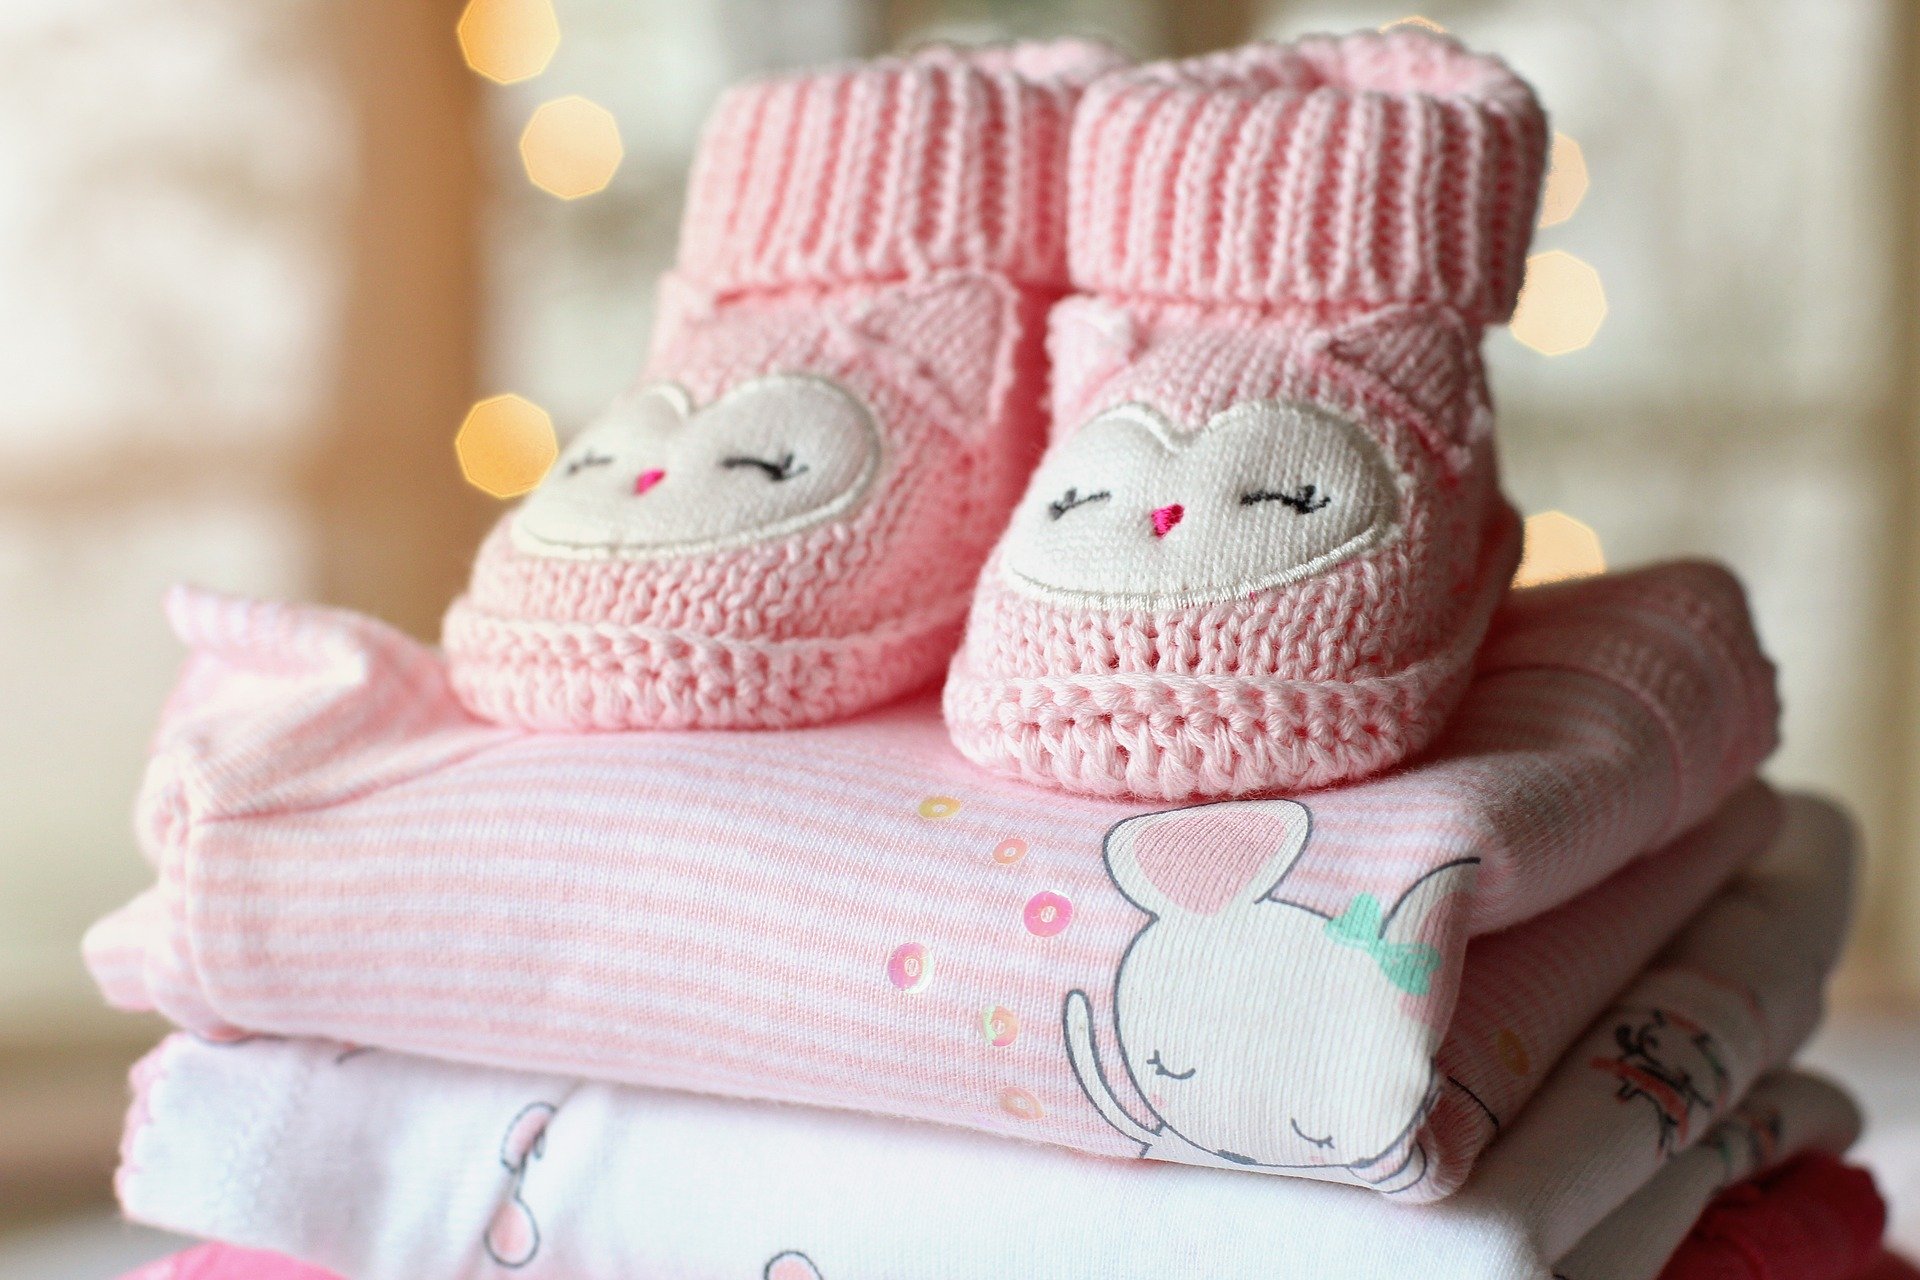 Inspiration for newborn baby girl gifts